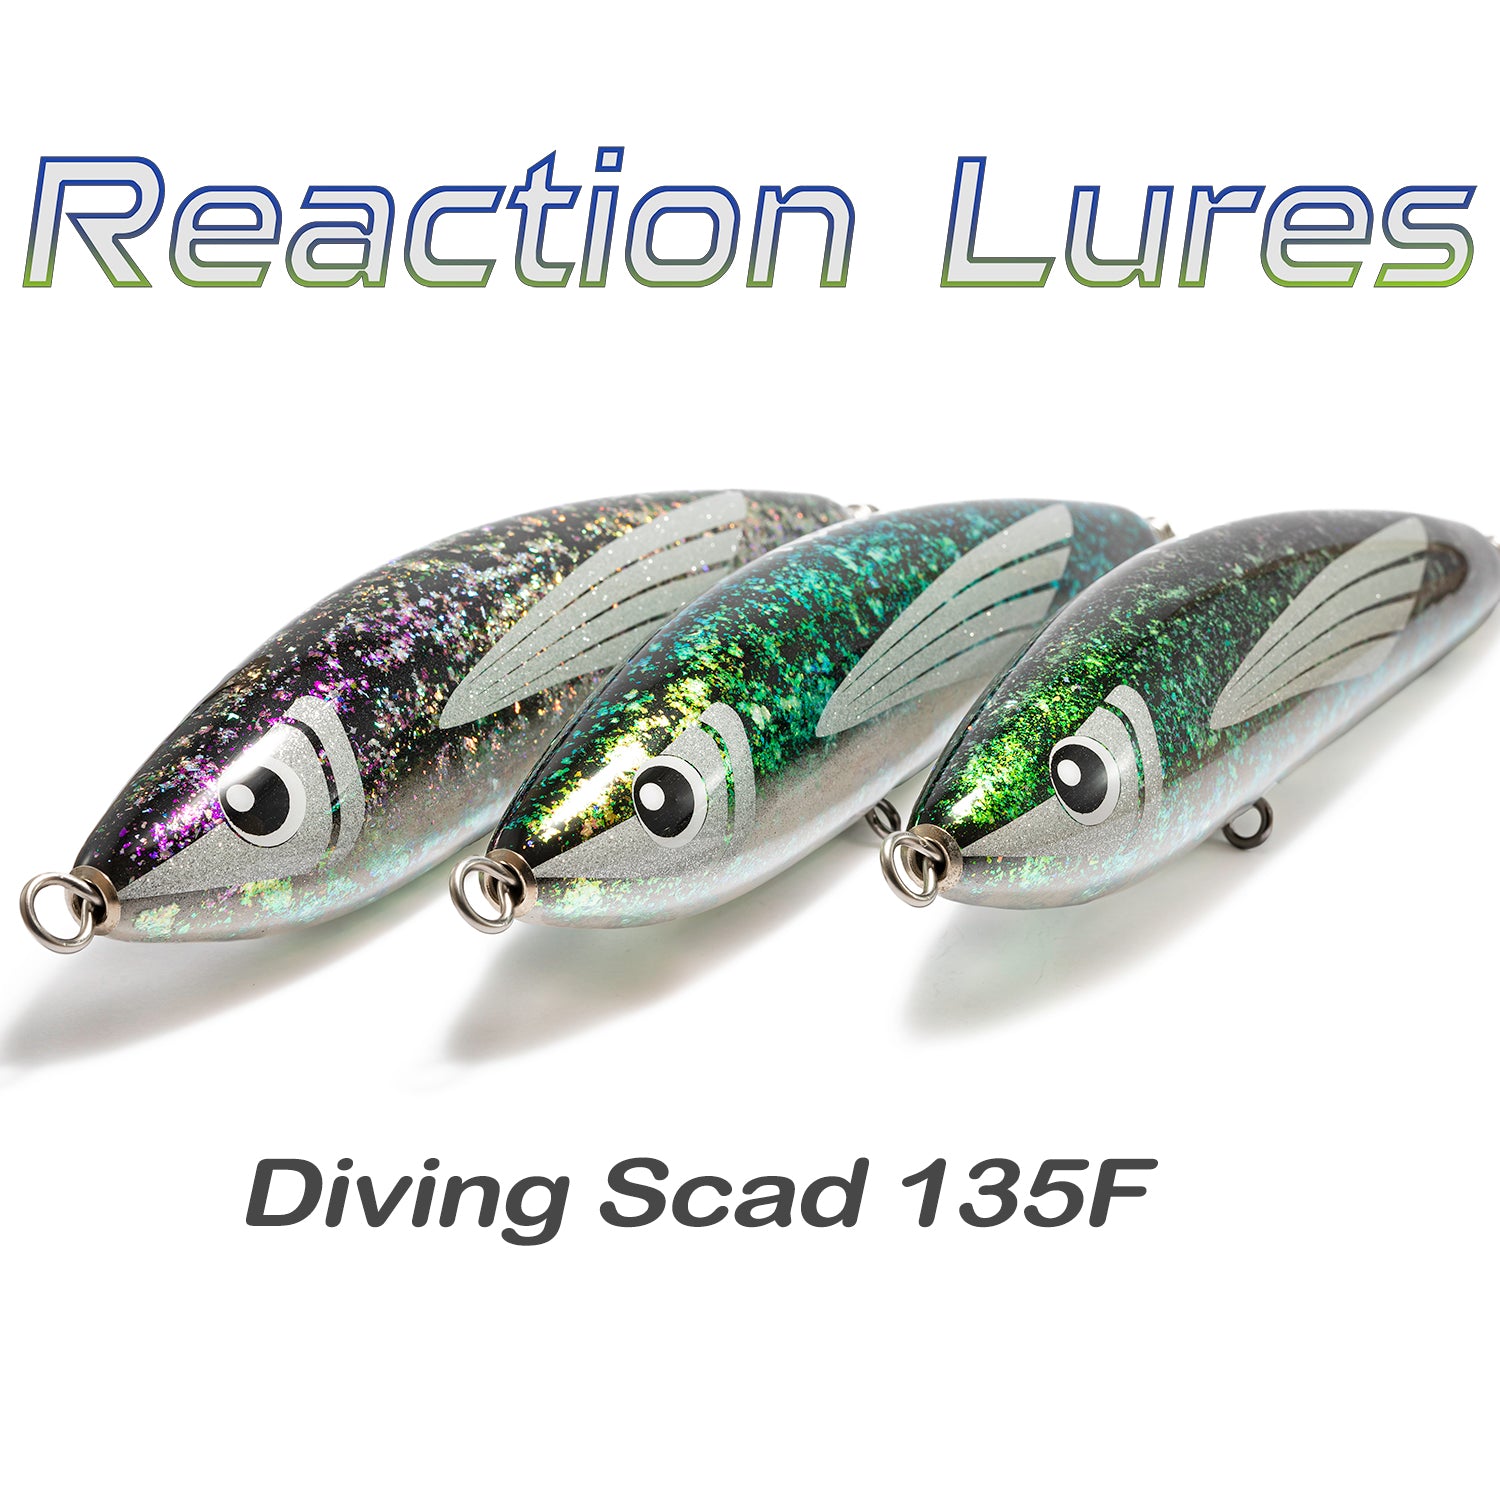 Reaction Lures Diving Scad 135